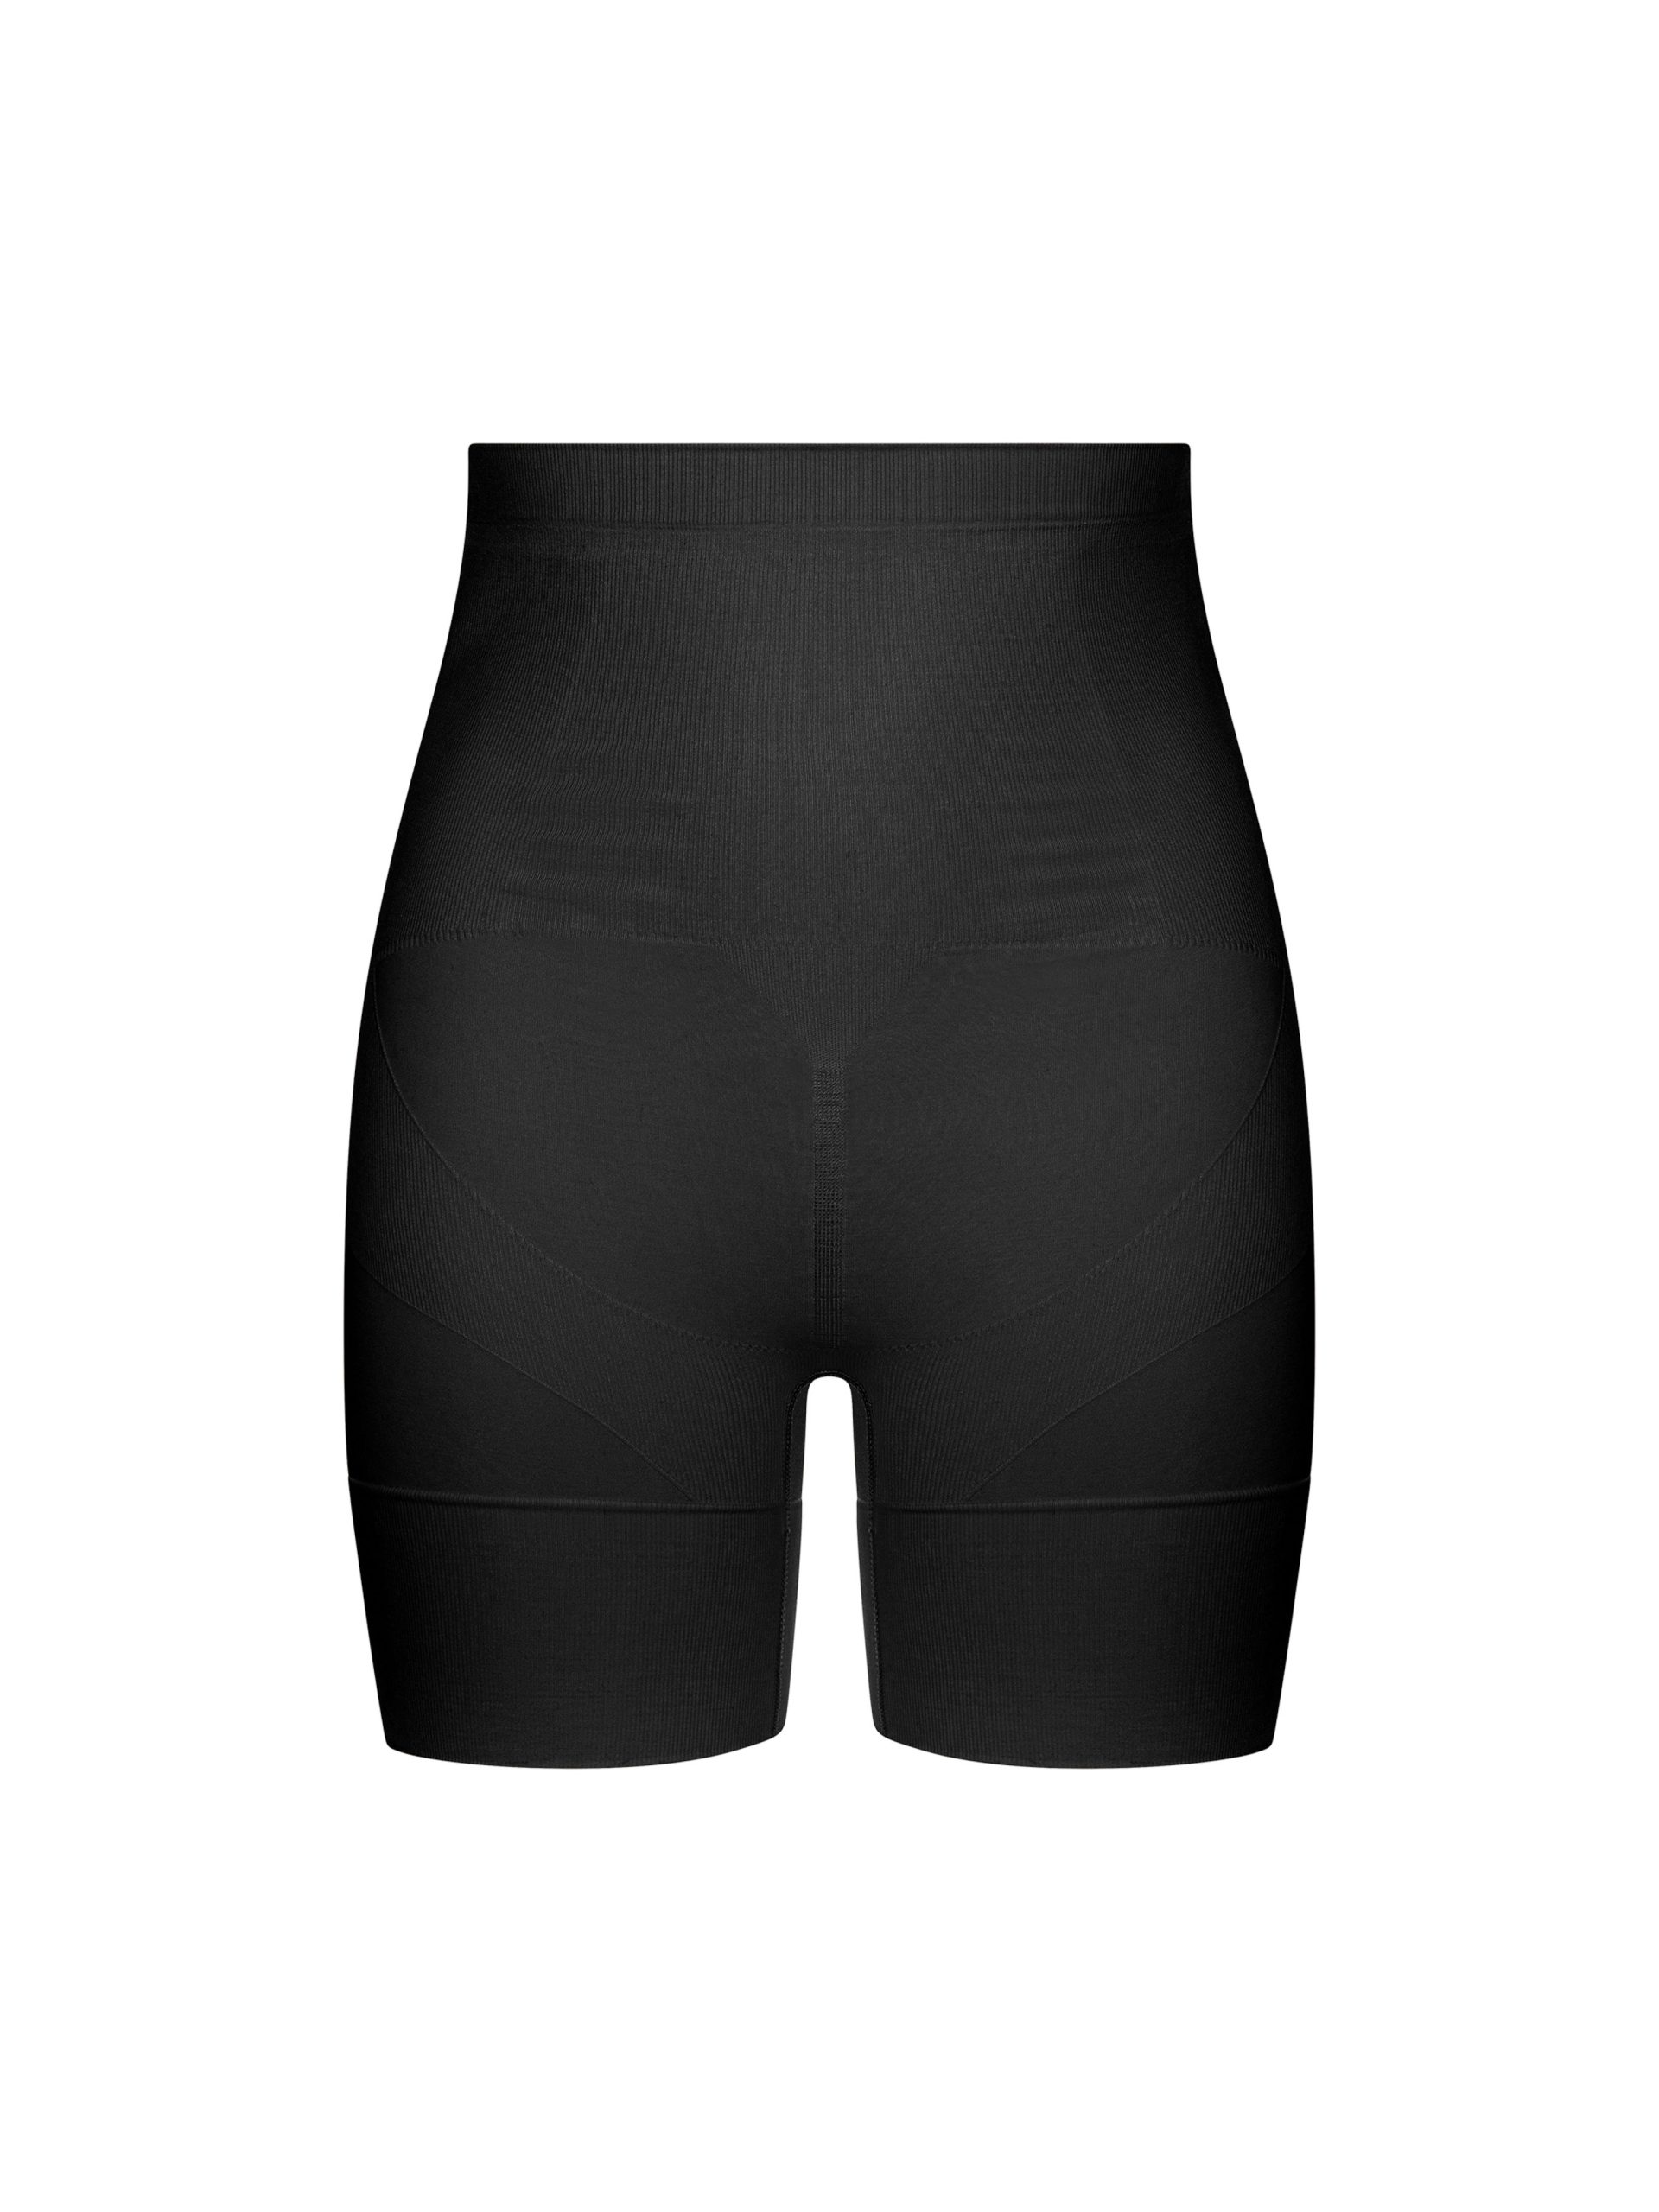 News - High-Waisted Shape Shorts: A Best-Selling Product with Over